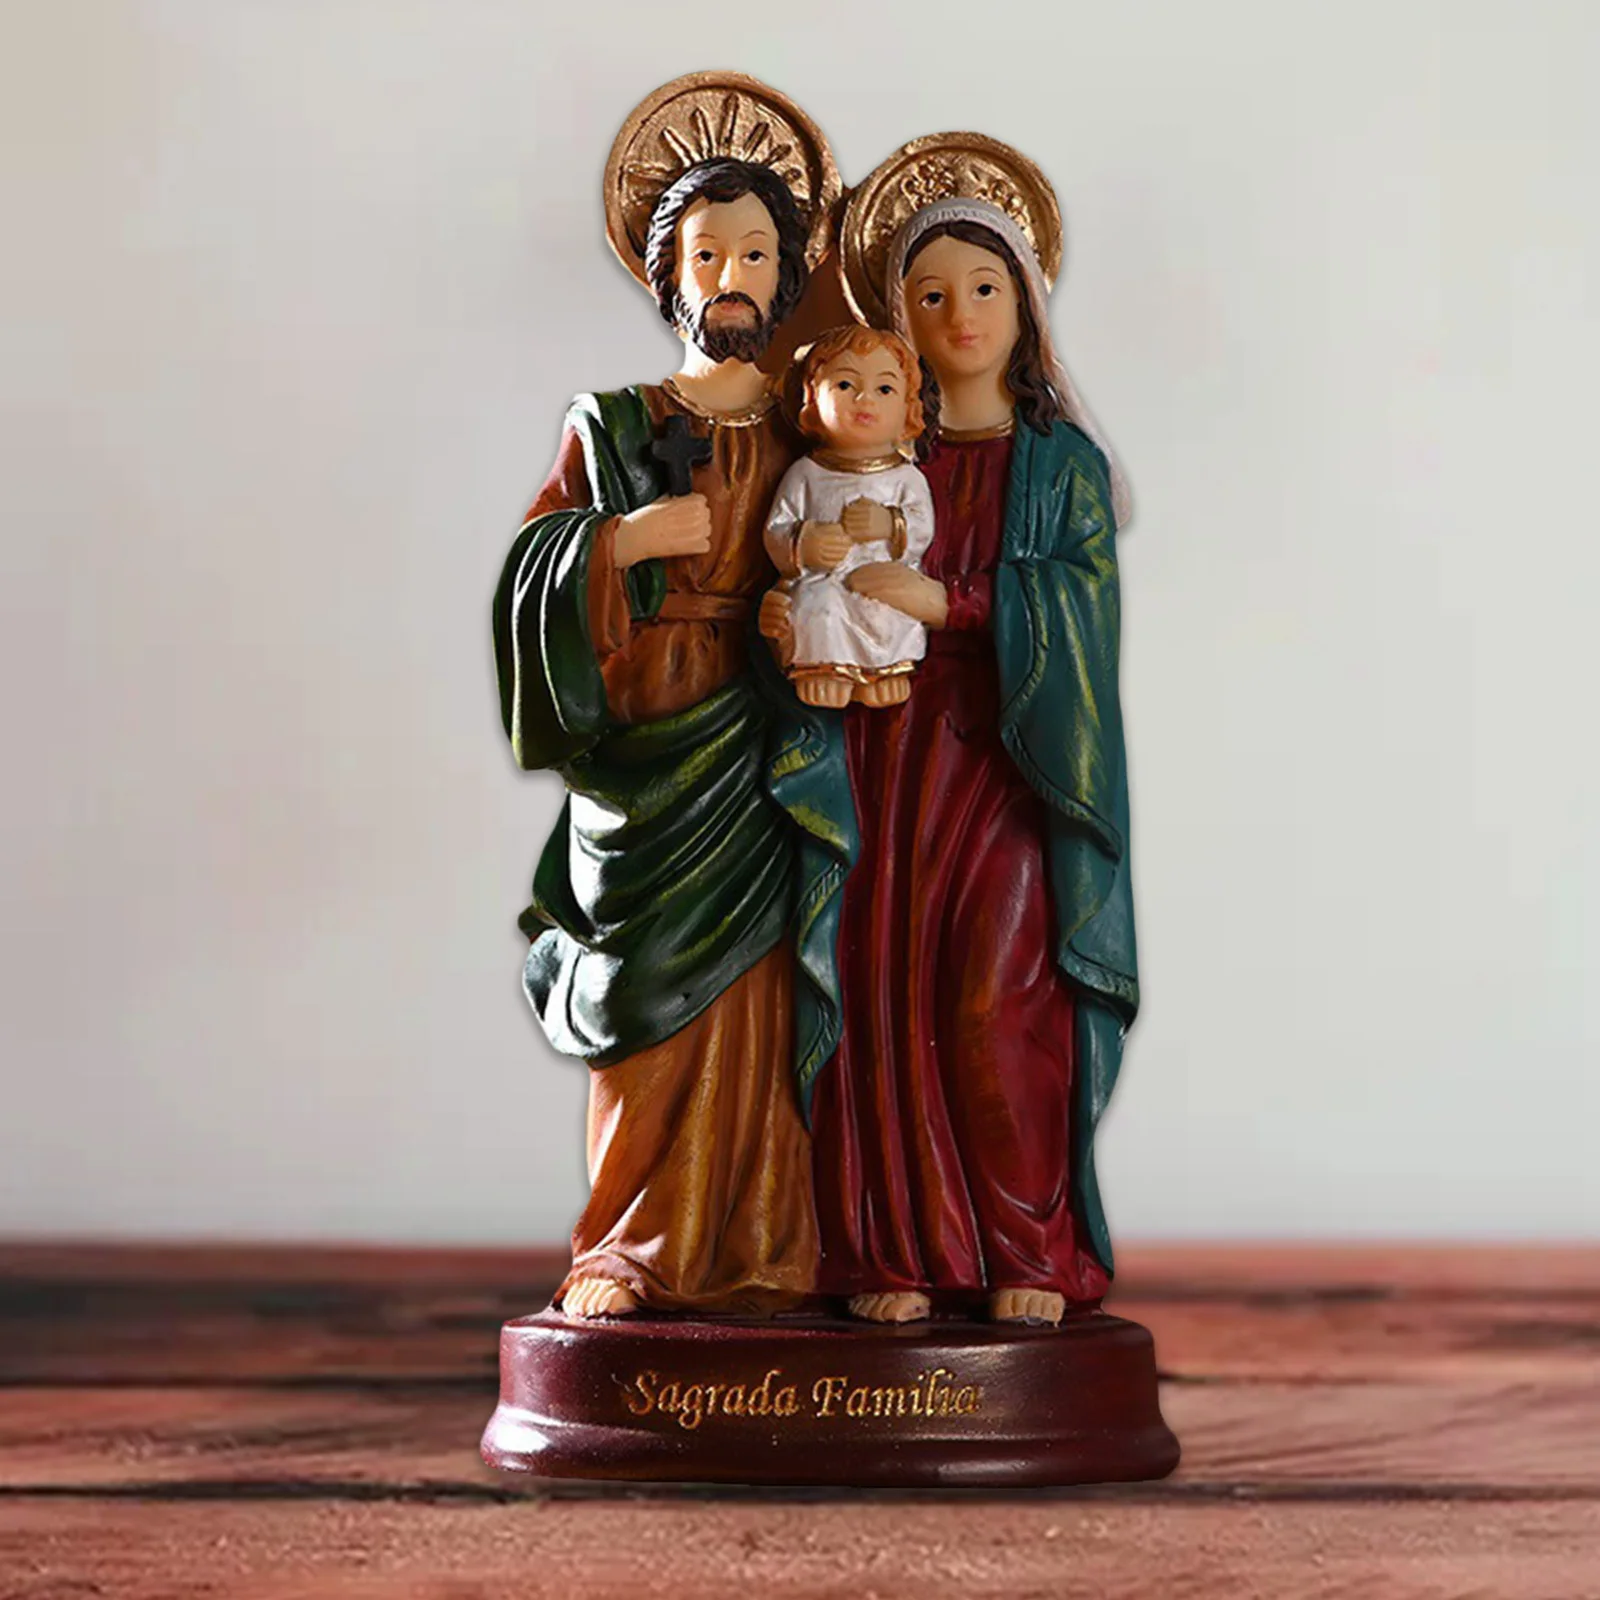 

Holy Family Statues Figure Child Jesus Christ Figurine Home Decorative Sculptures Catholic Church Souvenirs Gifts